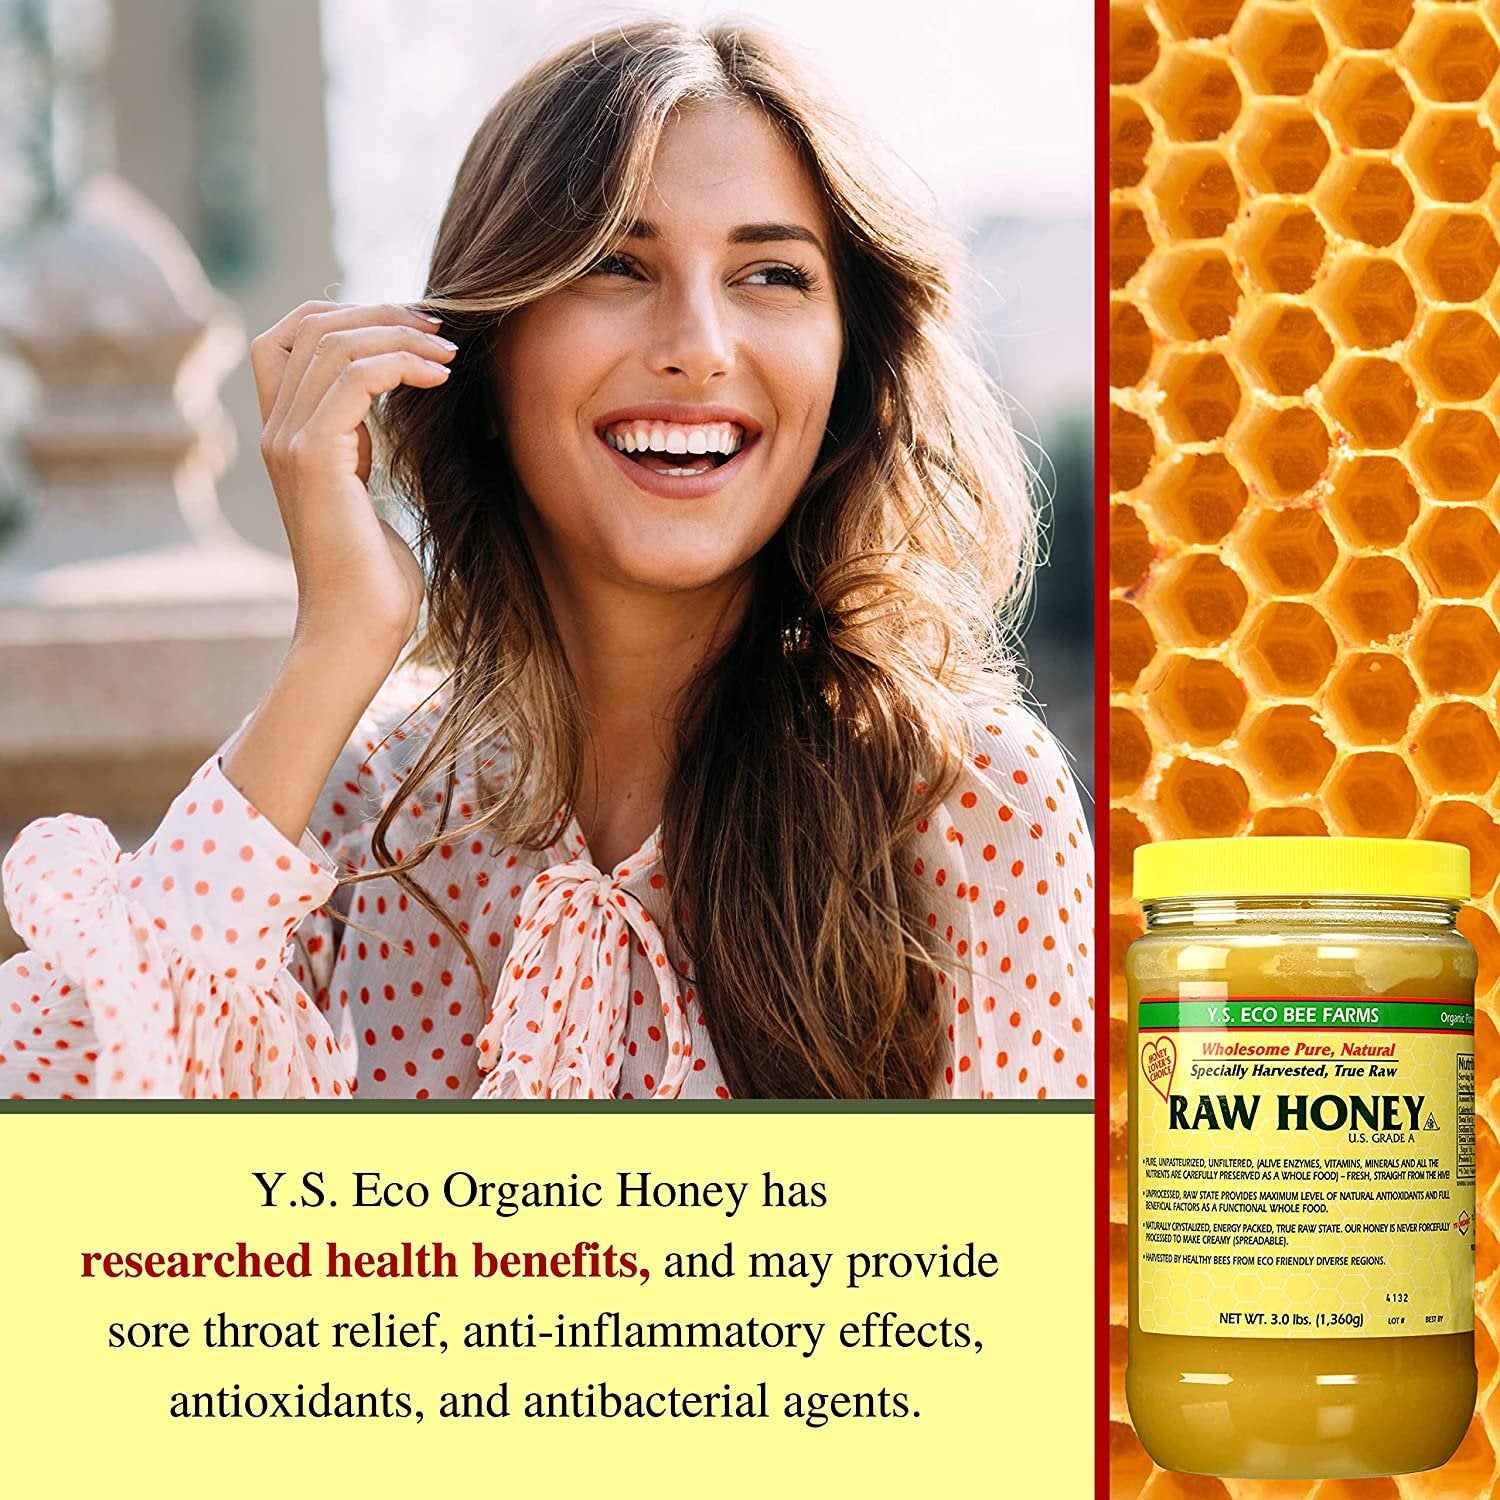 Y.S. Eco Bee Farms, Y.S. Organic Bee Farms, Wholesome Natural Raw Honey, Unpasteurized, Unfiltered, Fresh Raw State, Kosher, Pure, Natural, Healthy, Safe, Gluten Free, Specially Harvested, 3lb